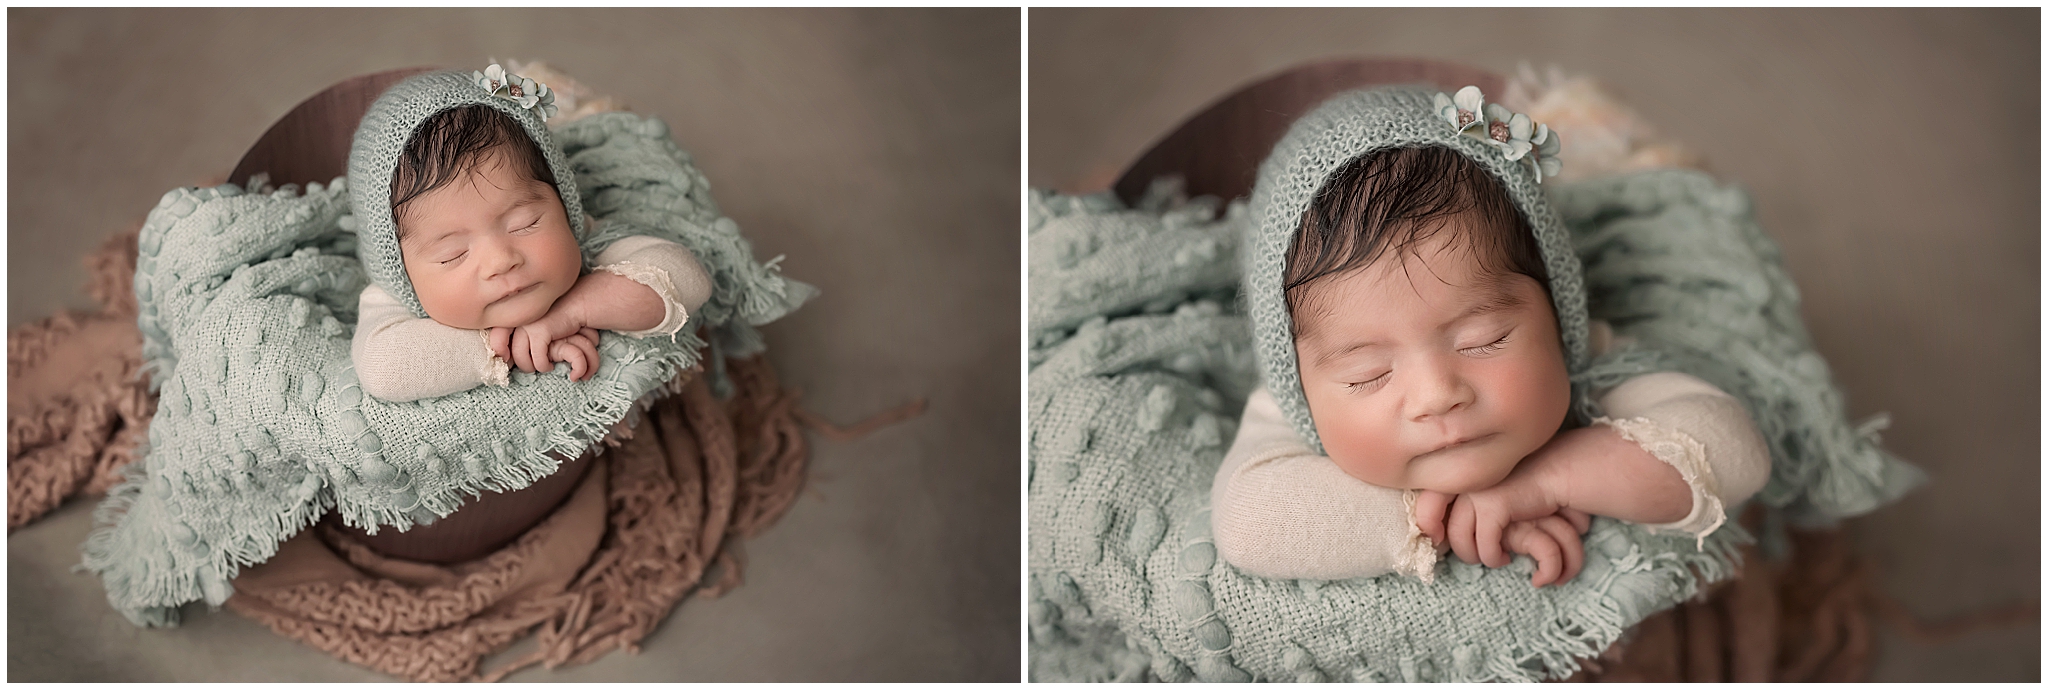 baby girl's newborn photography session at studio in london ontario